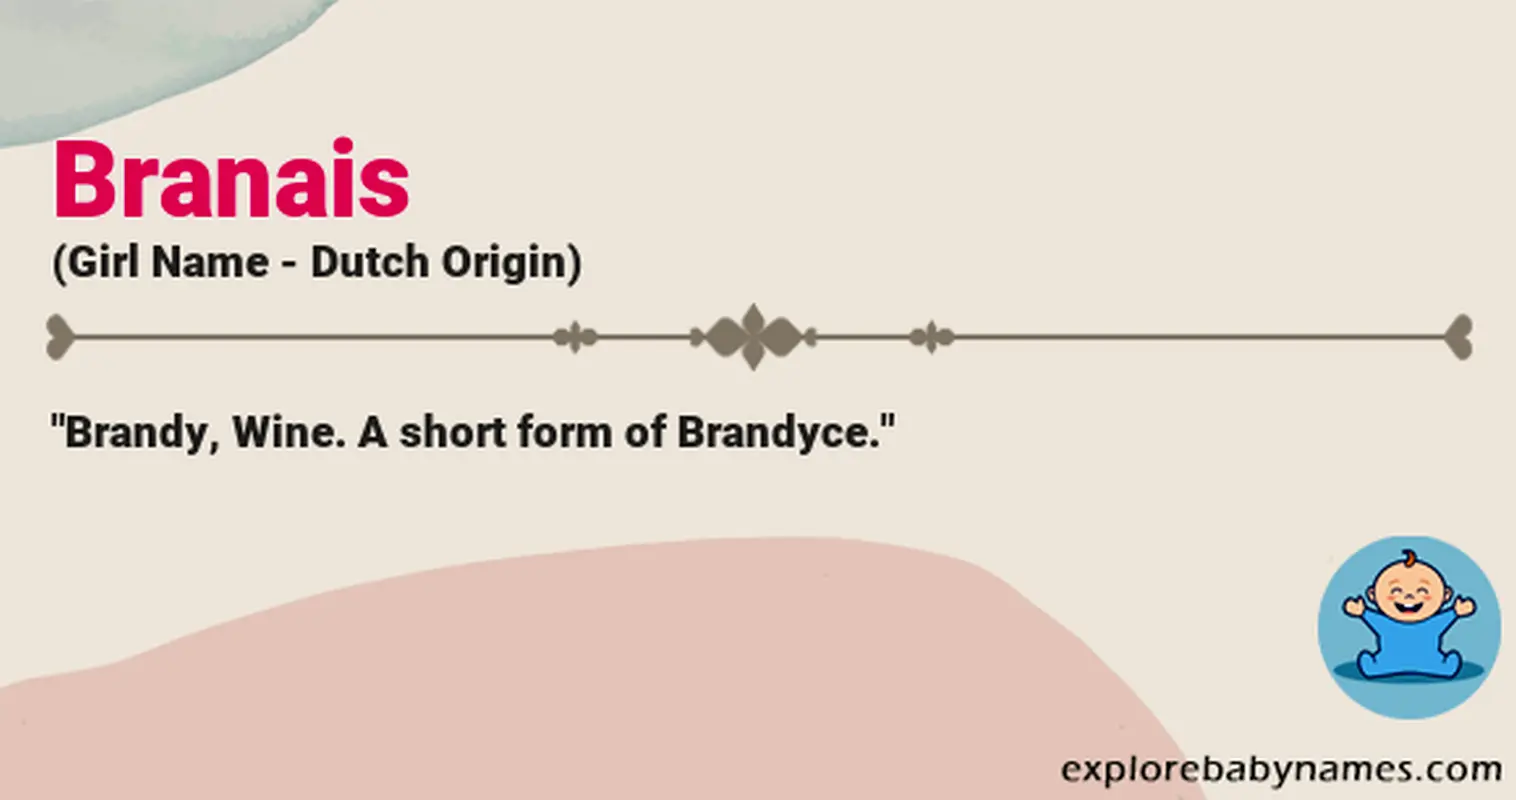 Meaning of Branais